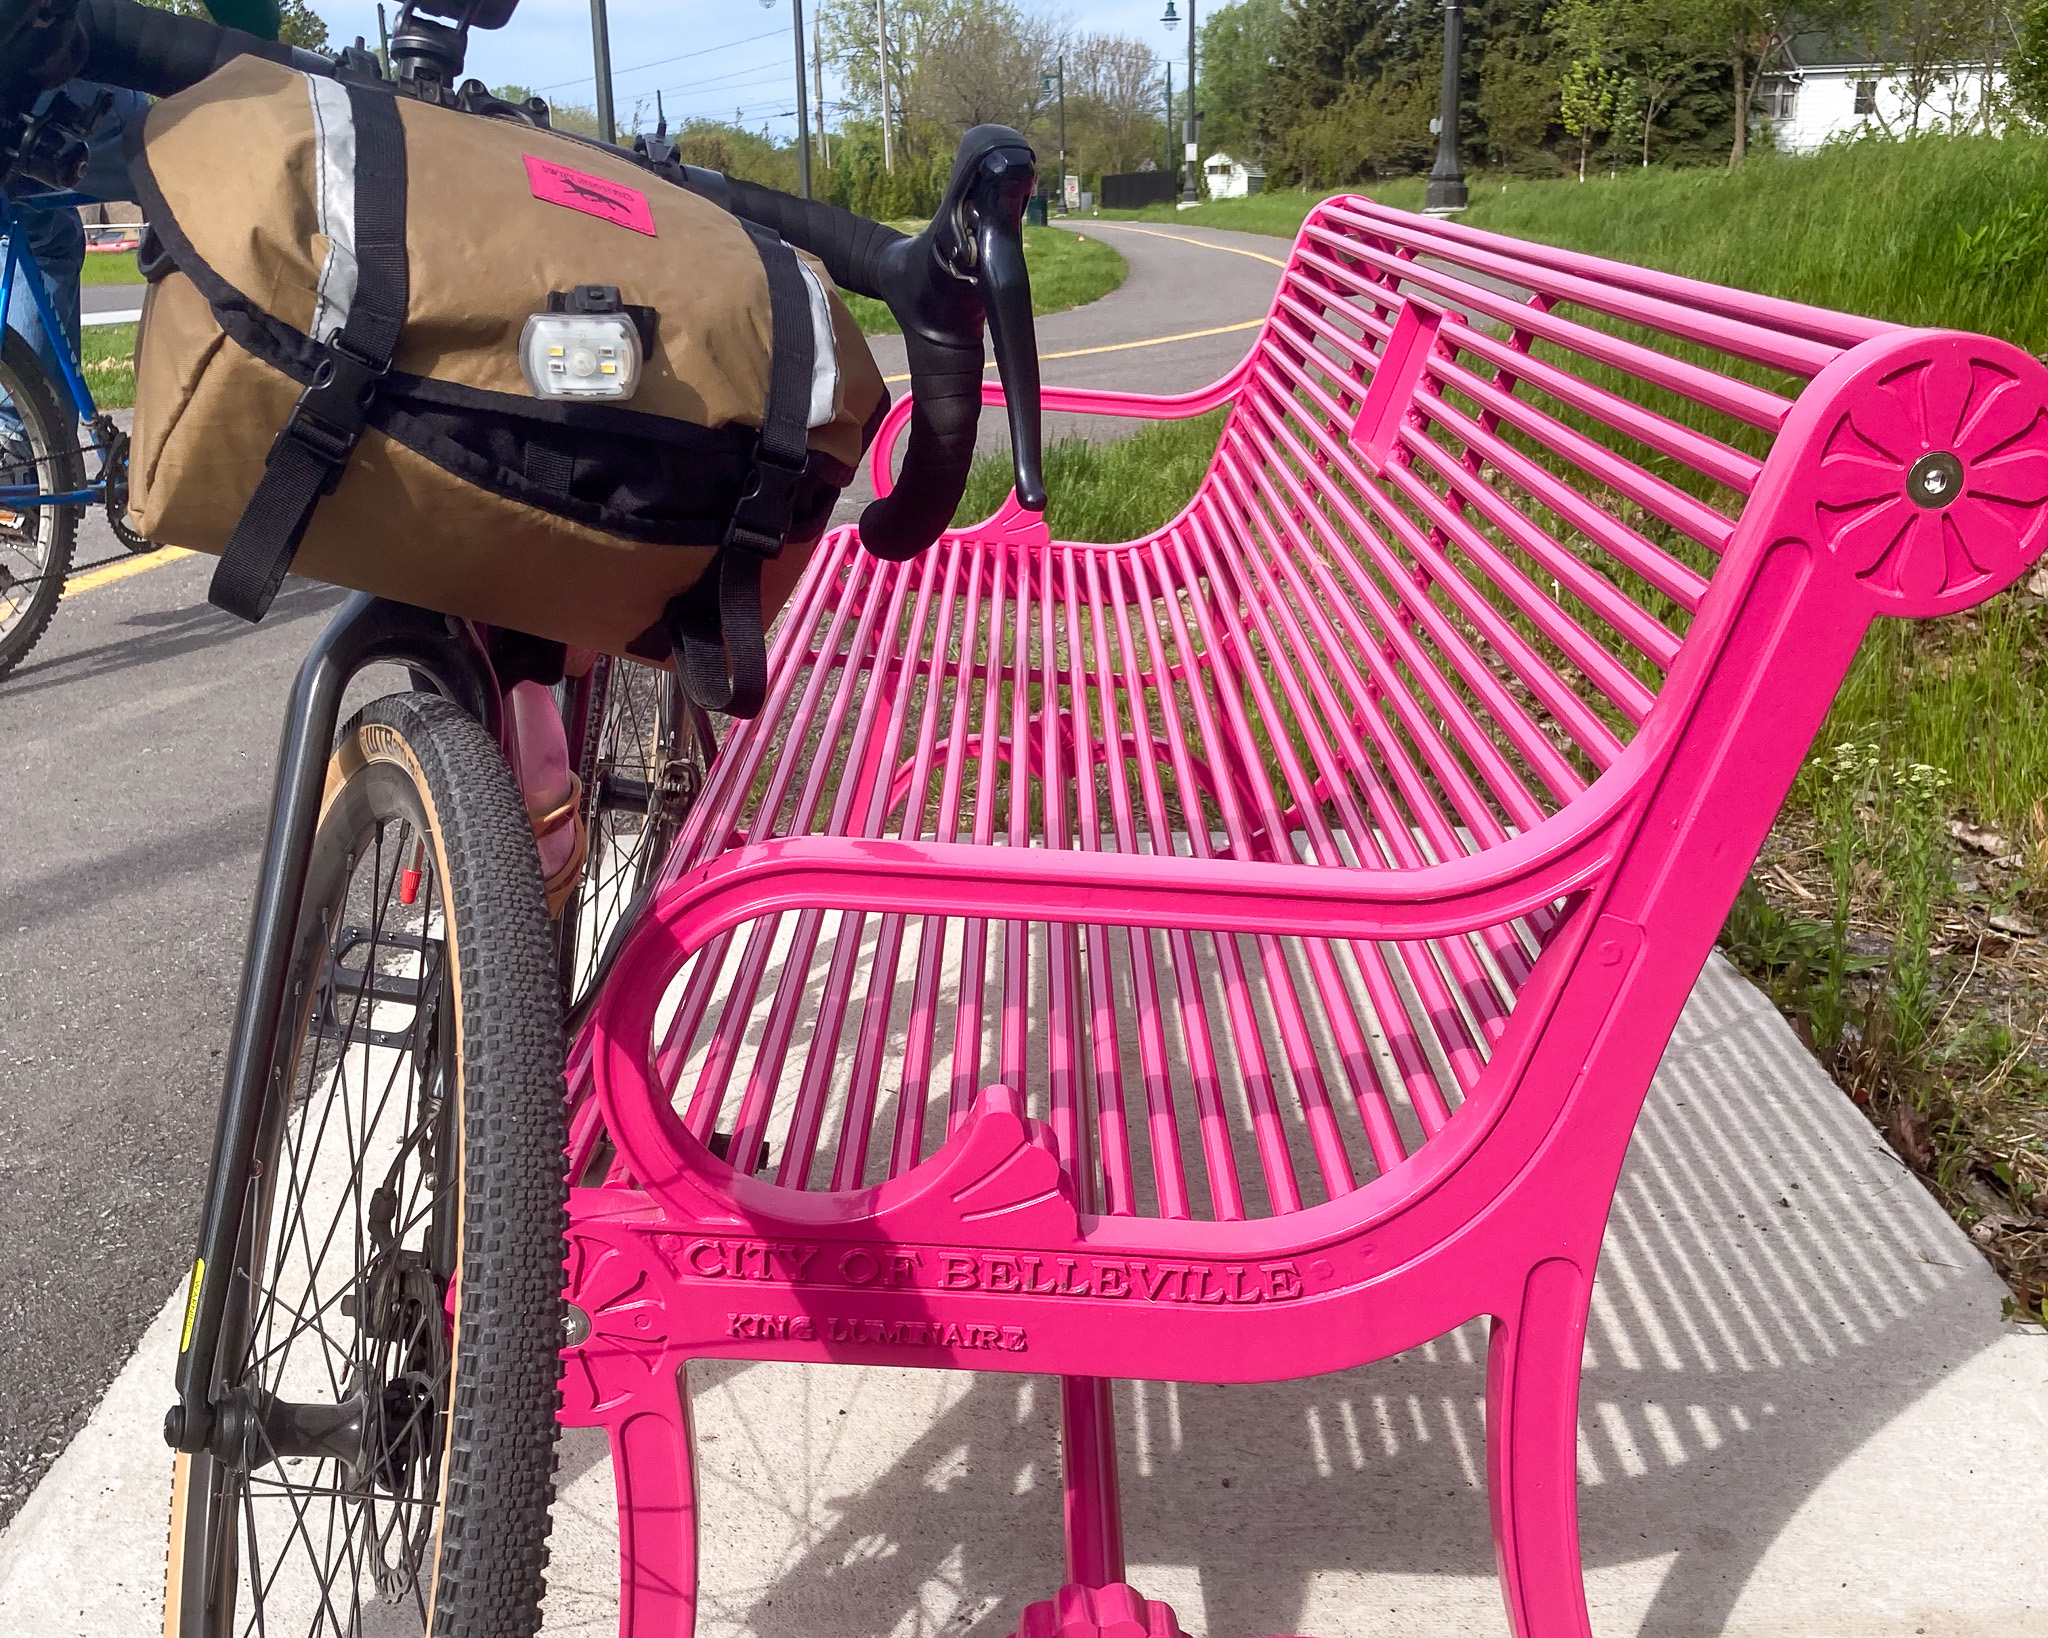 a bicycle leaning up against a hot pink park bench